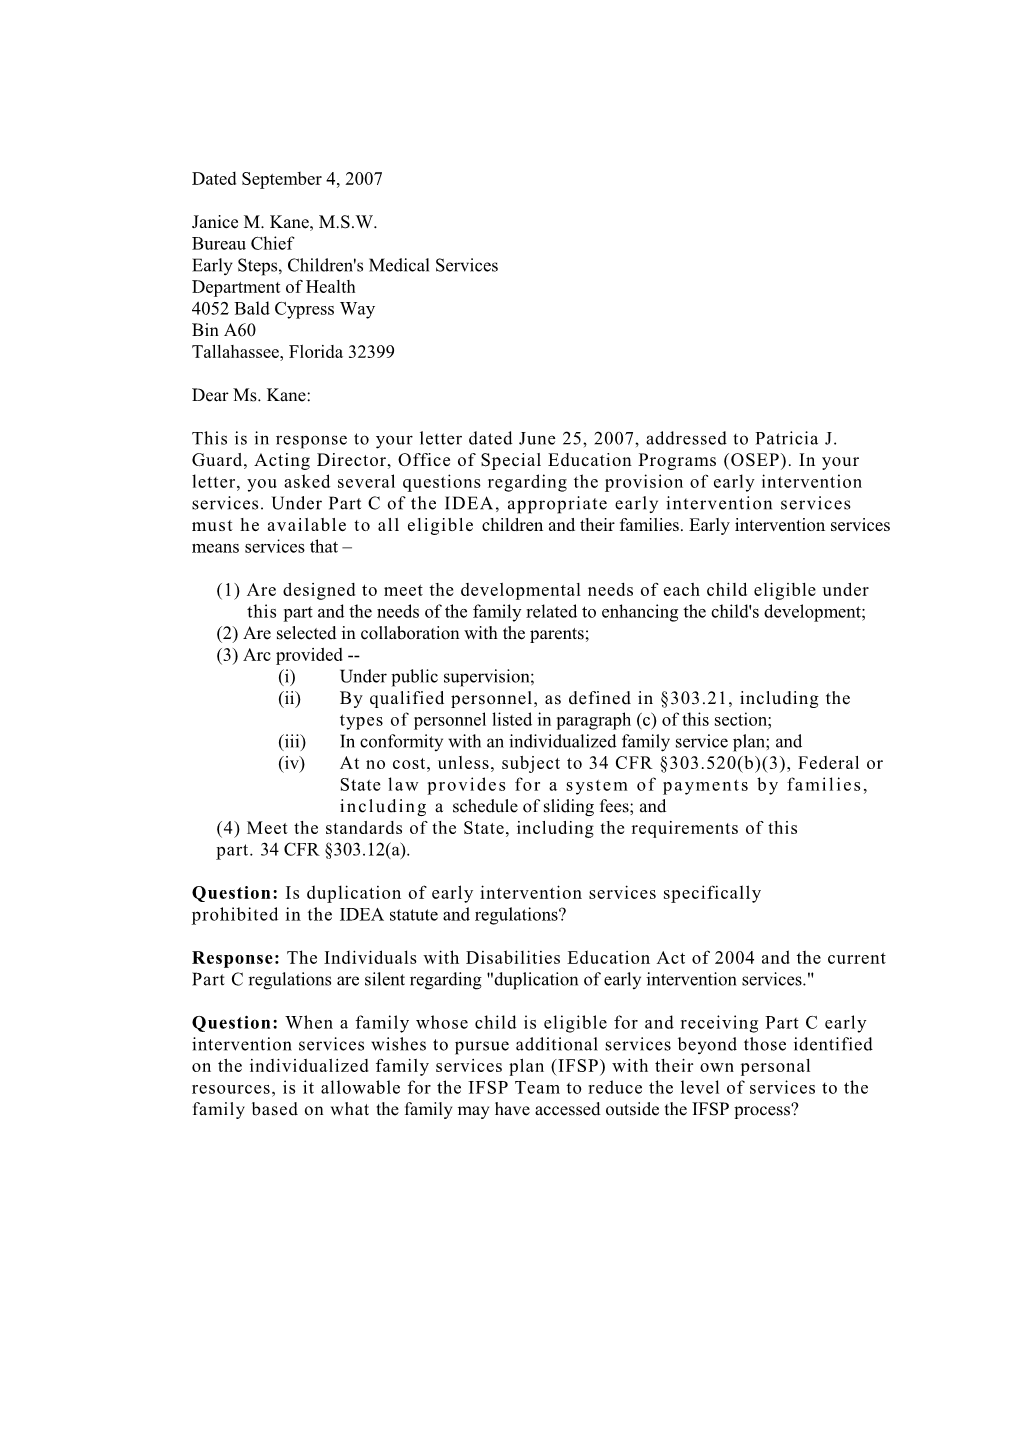 Kane Letter Dated 09/04/07 Re: Content of Plan (Ms Word)